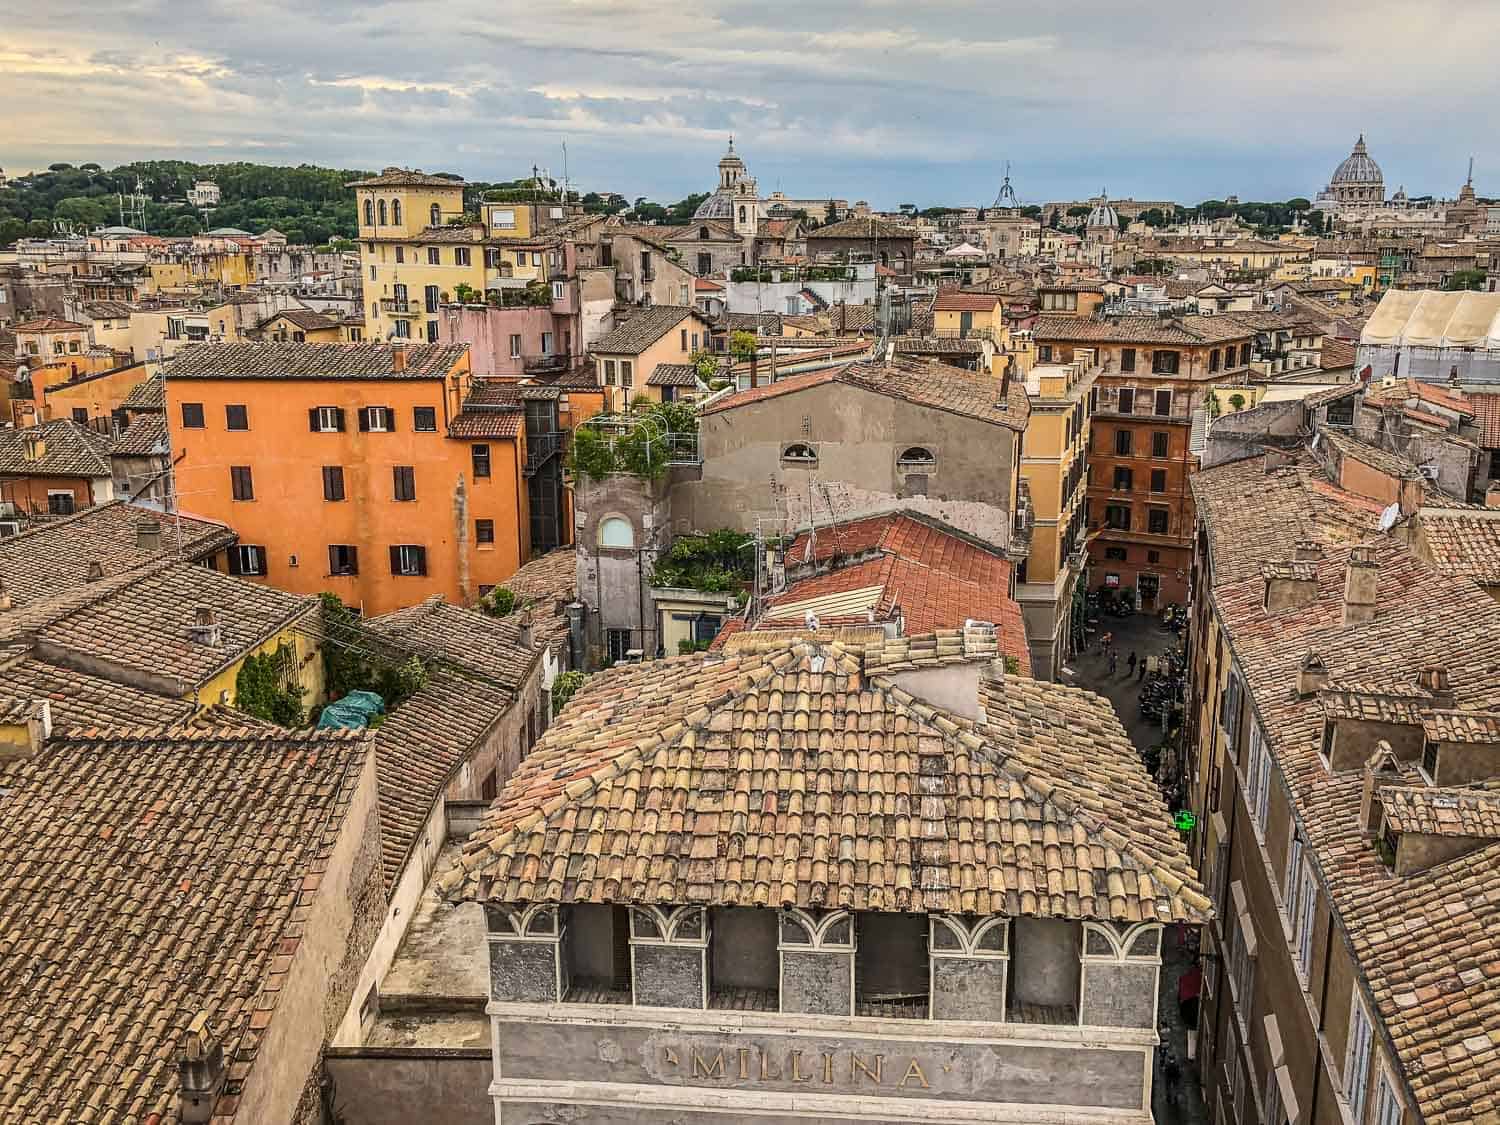 The Eitch Borromini rooftop terrace is one of the best unusual things to do in Rome